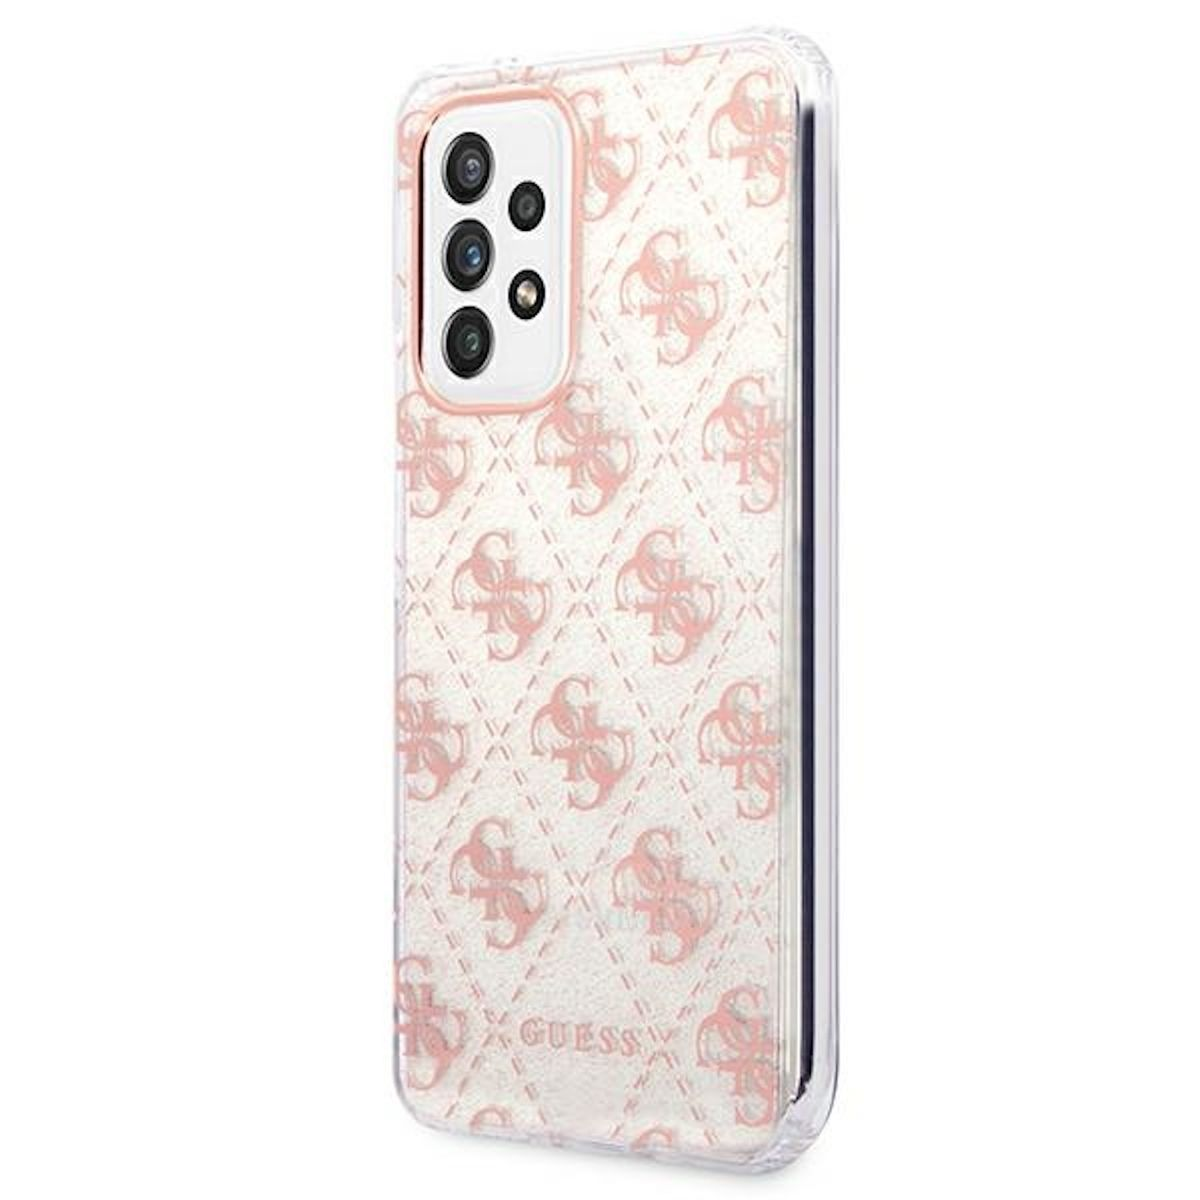 GUESS 4G Glitter Collection Design Backcover, 5G A536, Rose A53 Galaxy Samsung, Case